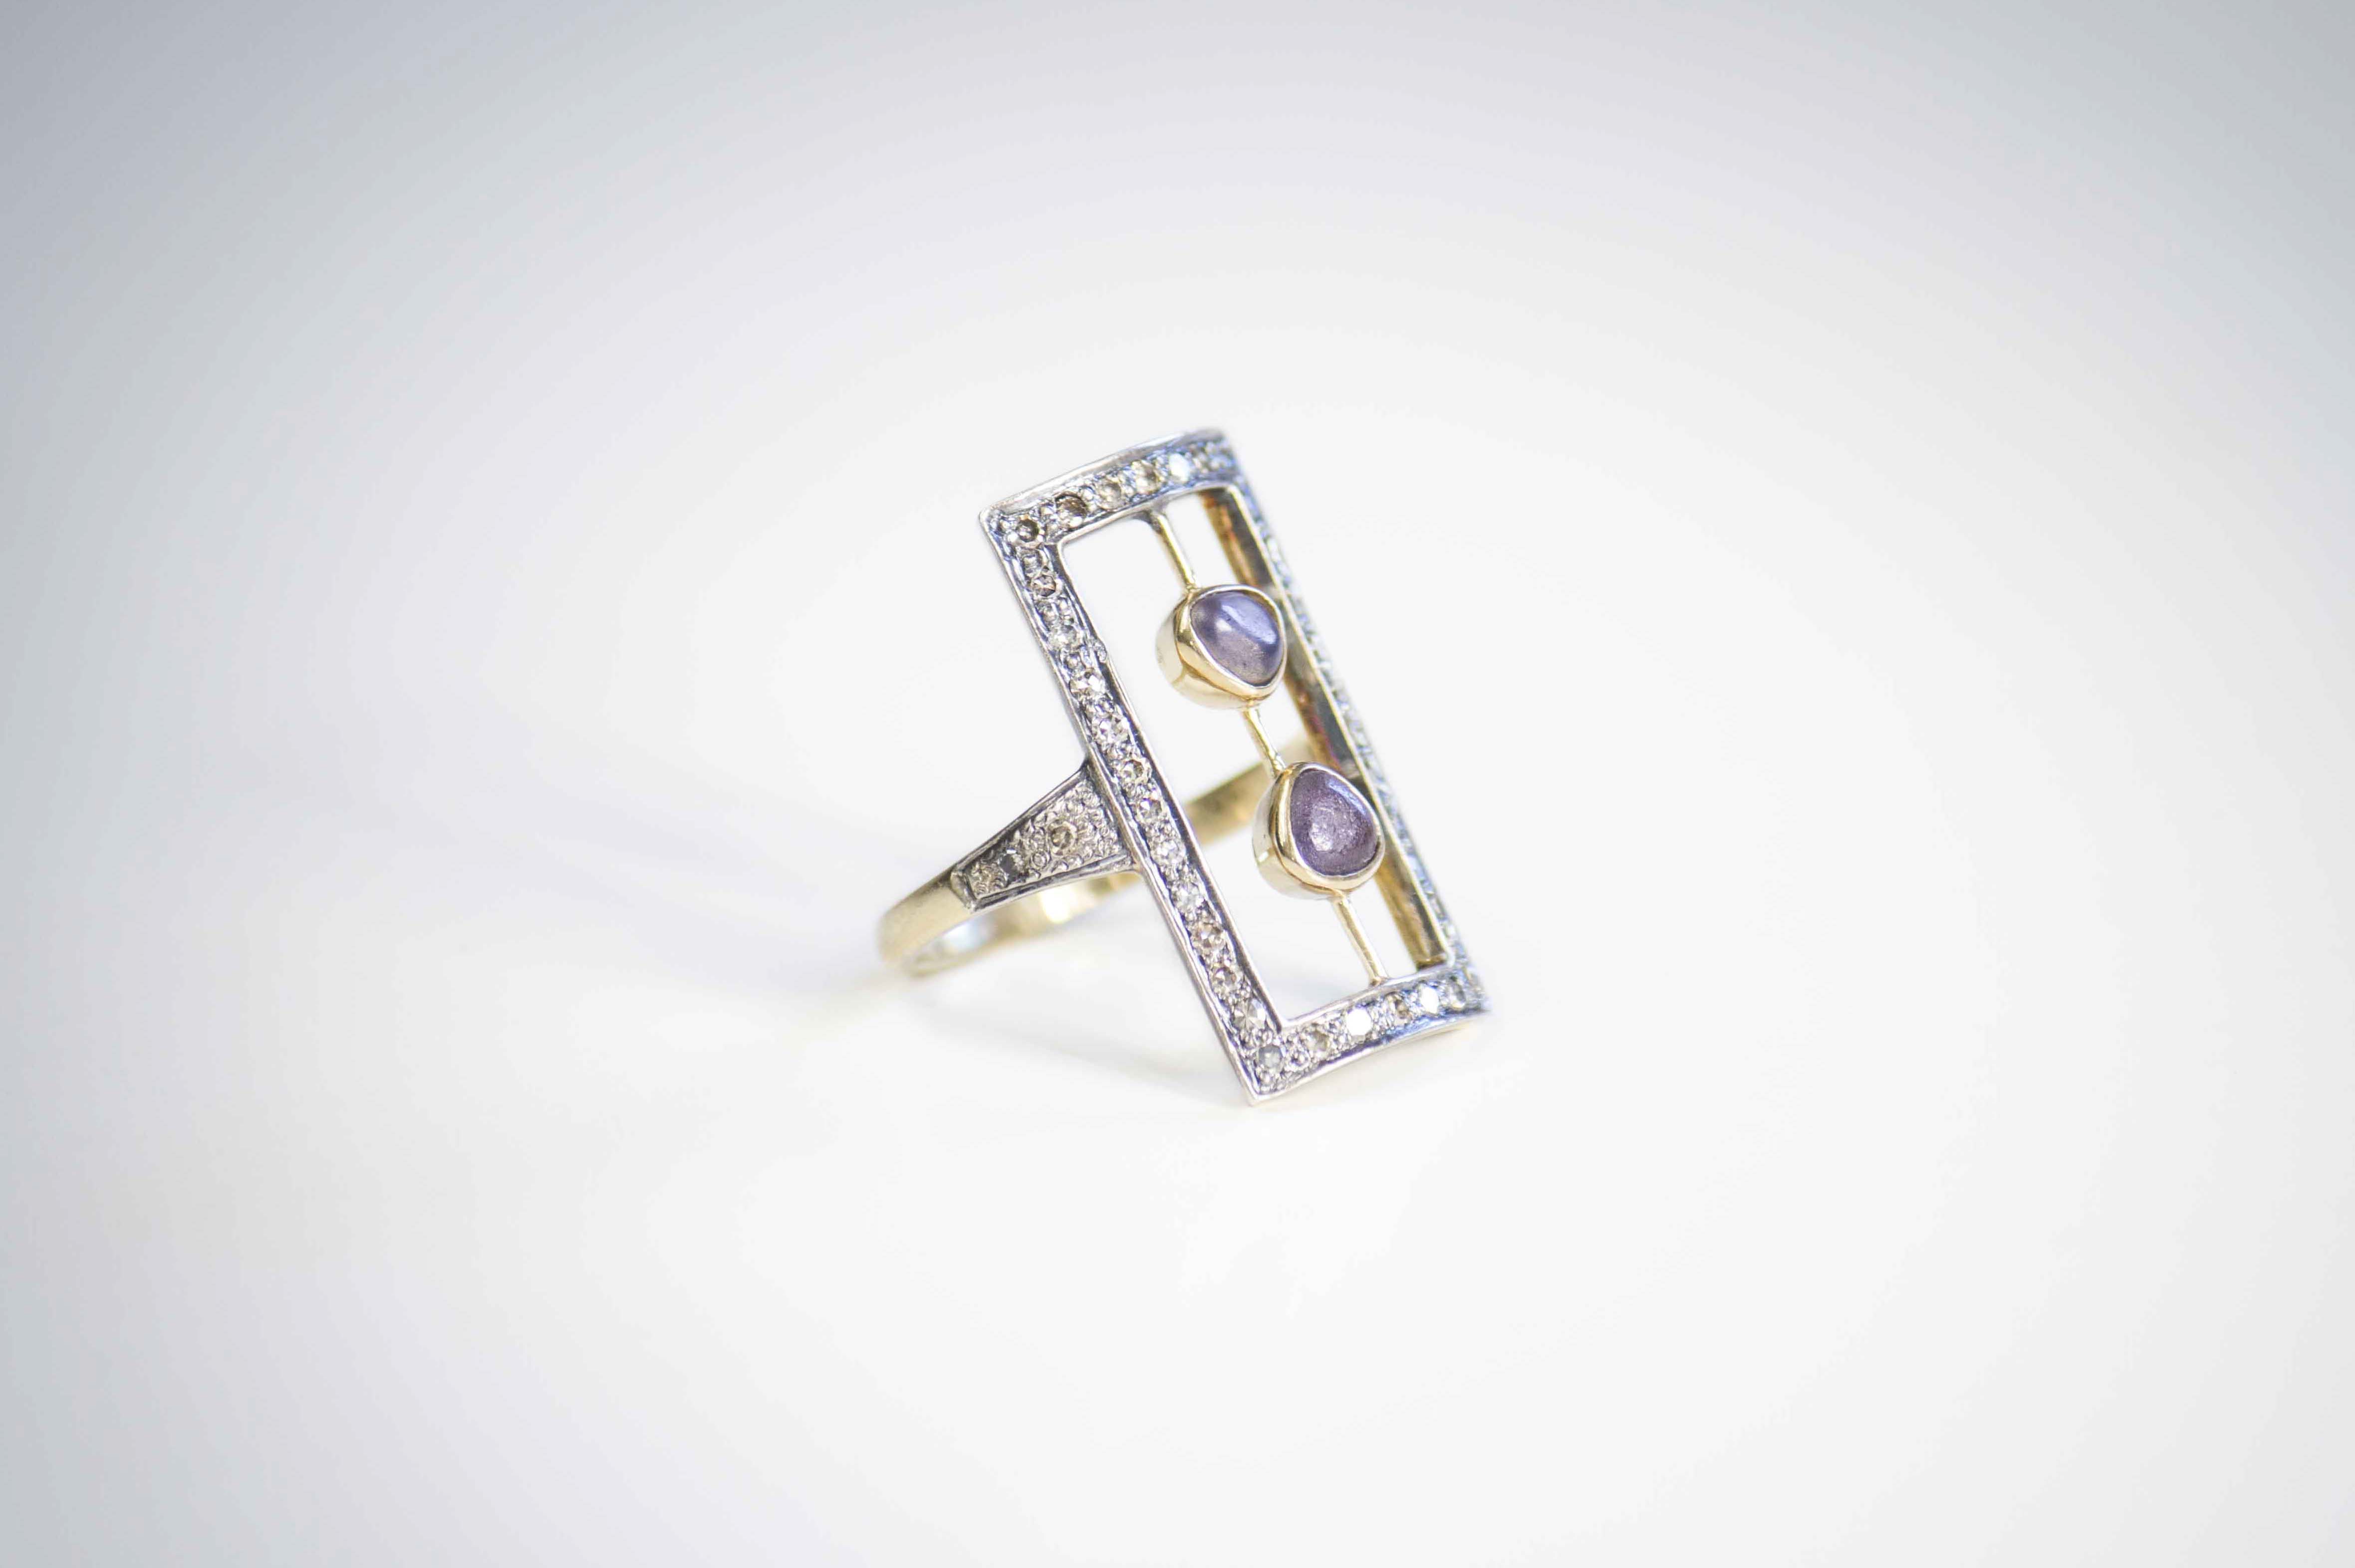 Deco diamonds ring Deco style ring crafted in yellow gold with diamond pave and rough spinels